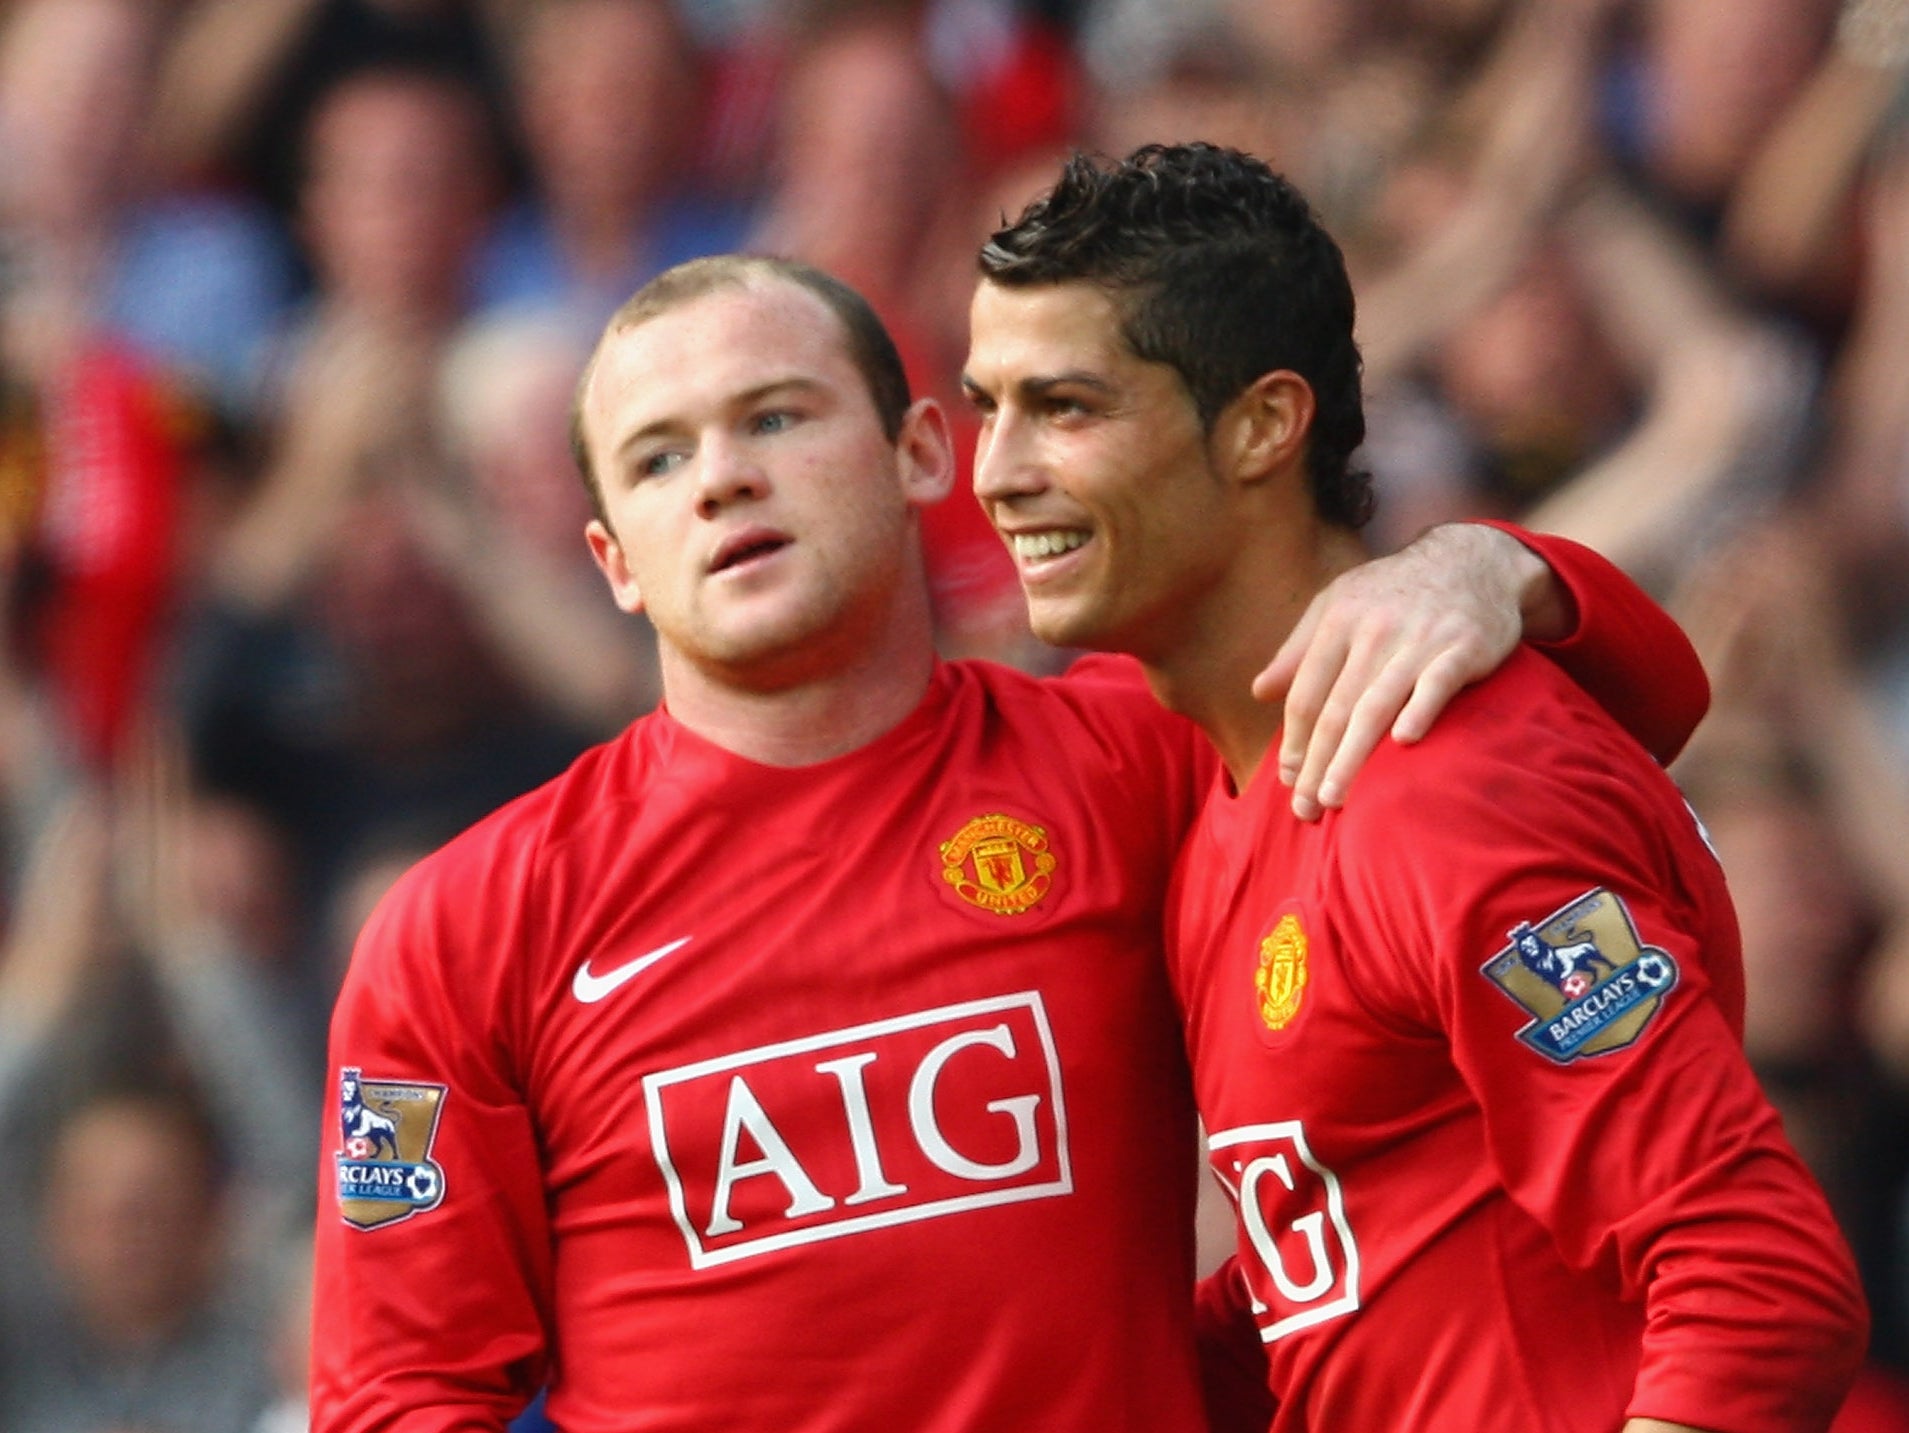 Wayne Rooney (left) was a teammate of Cristiano Ronaldo during the Portuguese’s first spell at Manchester United